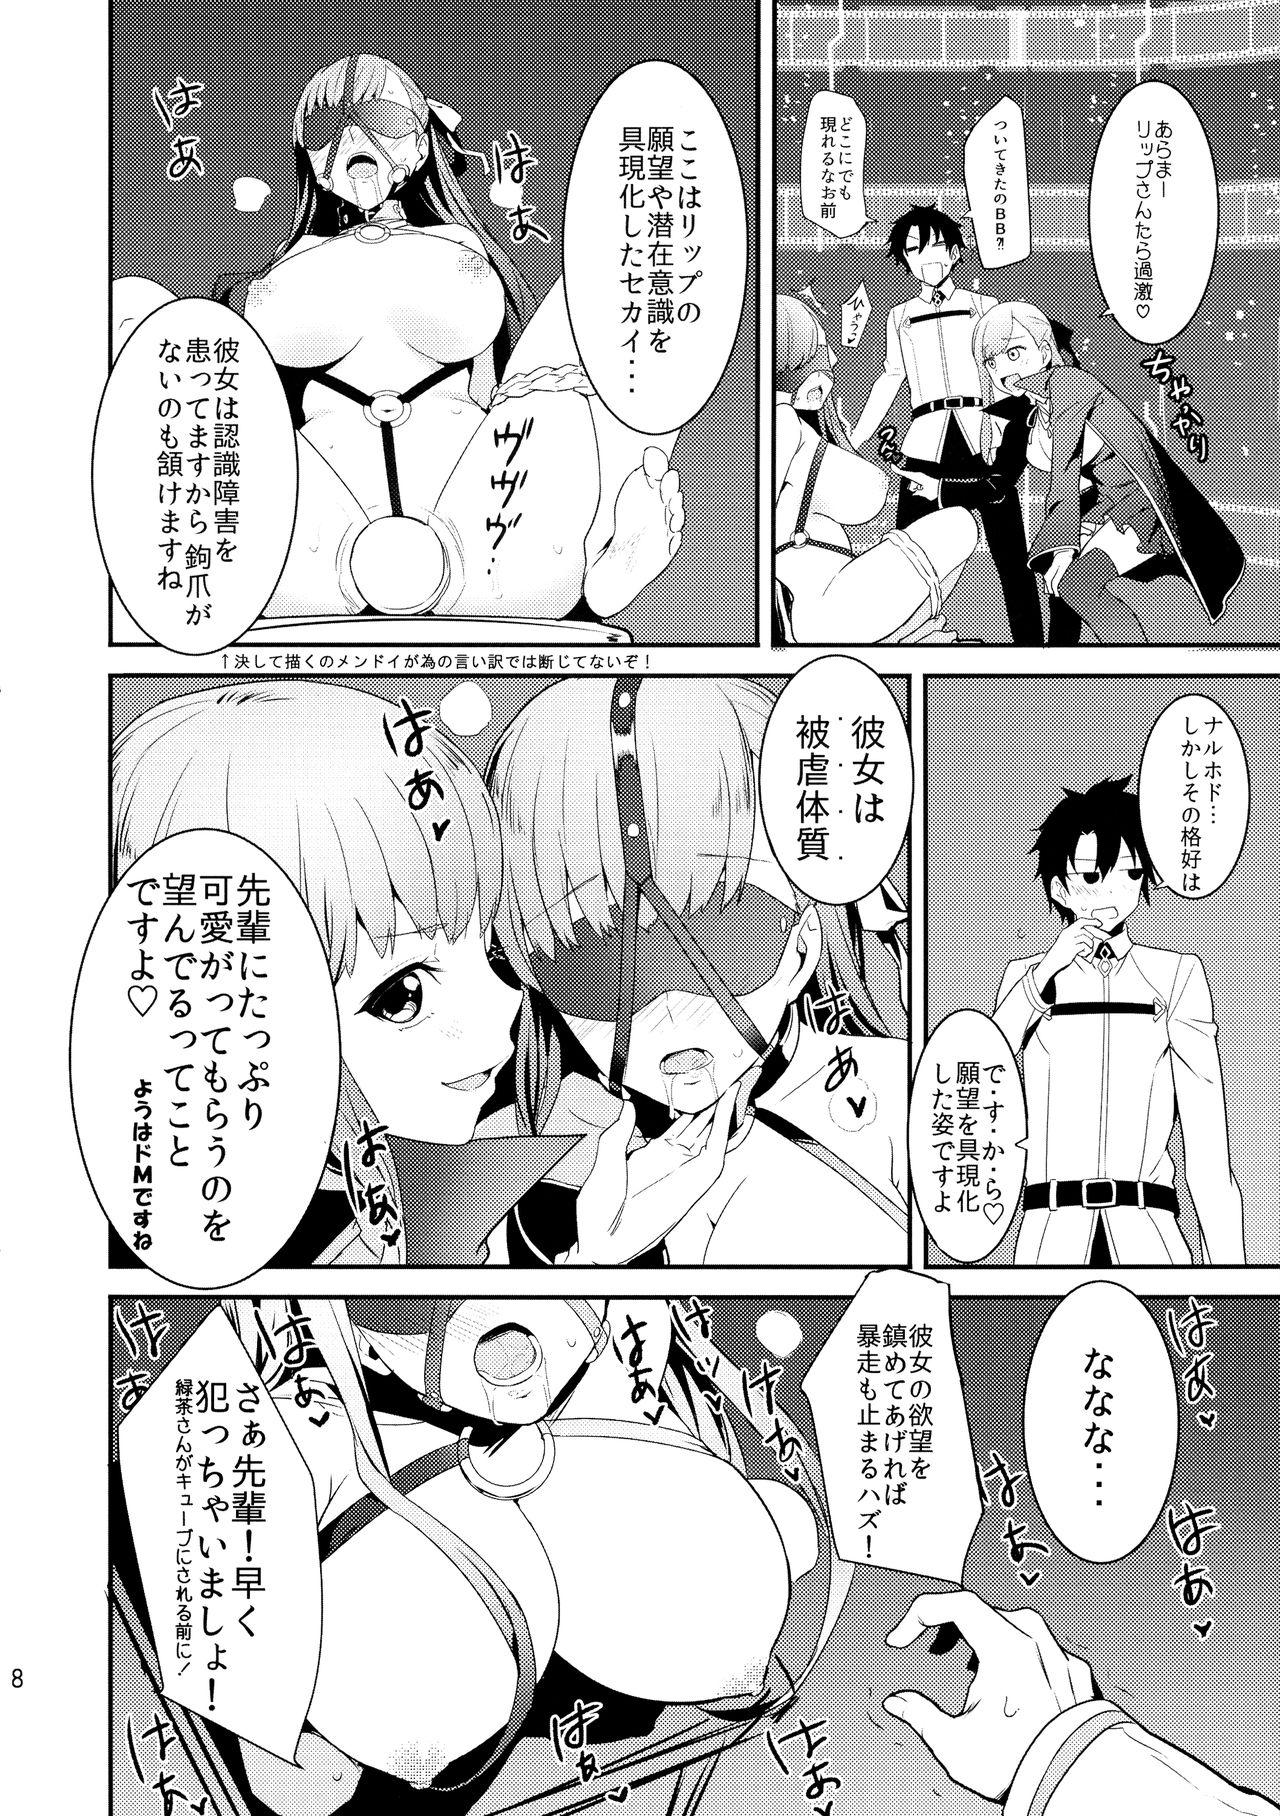 Porn Amateur In the Passion, Melty heart. 1 - Fate grand order Gay Rimming - Page 10